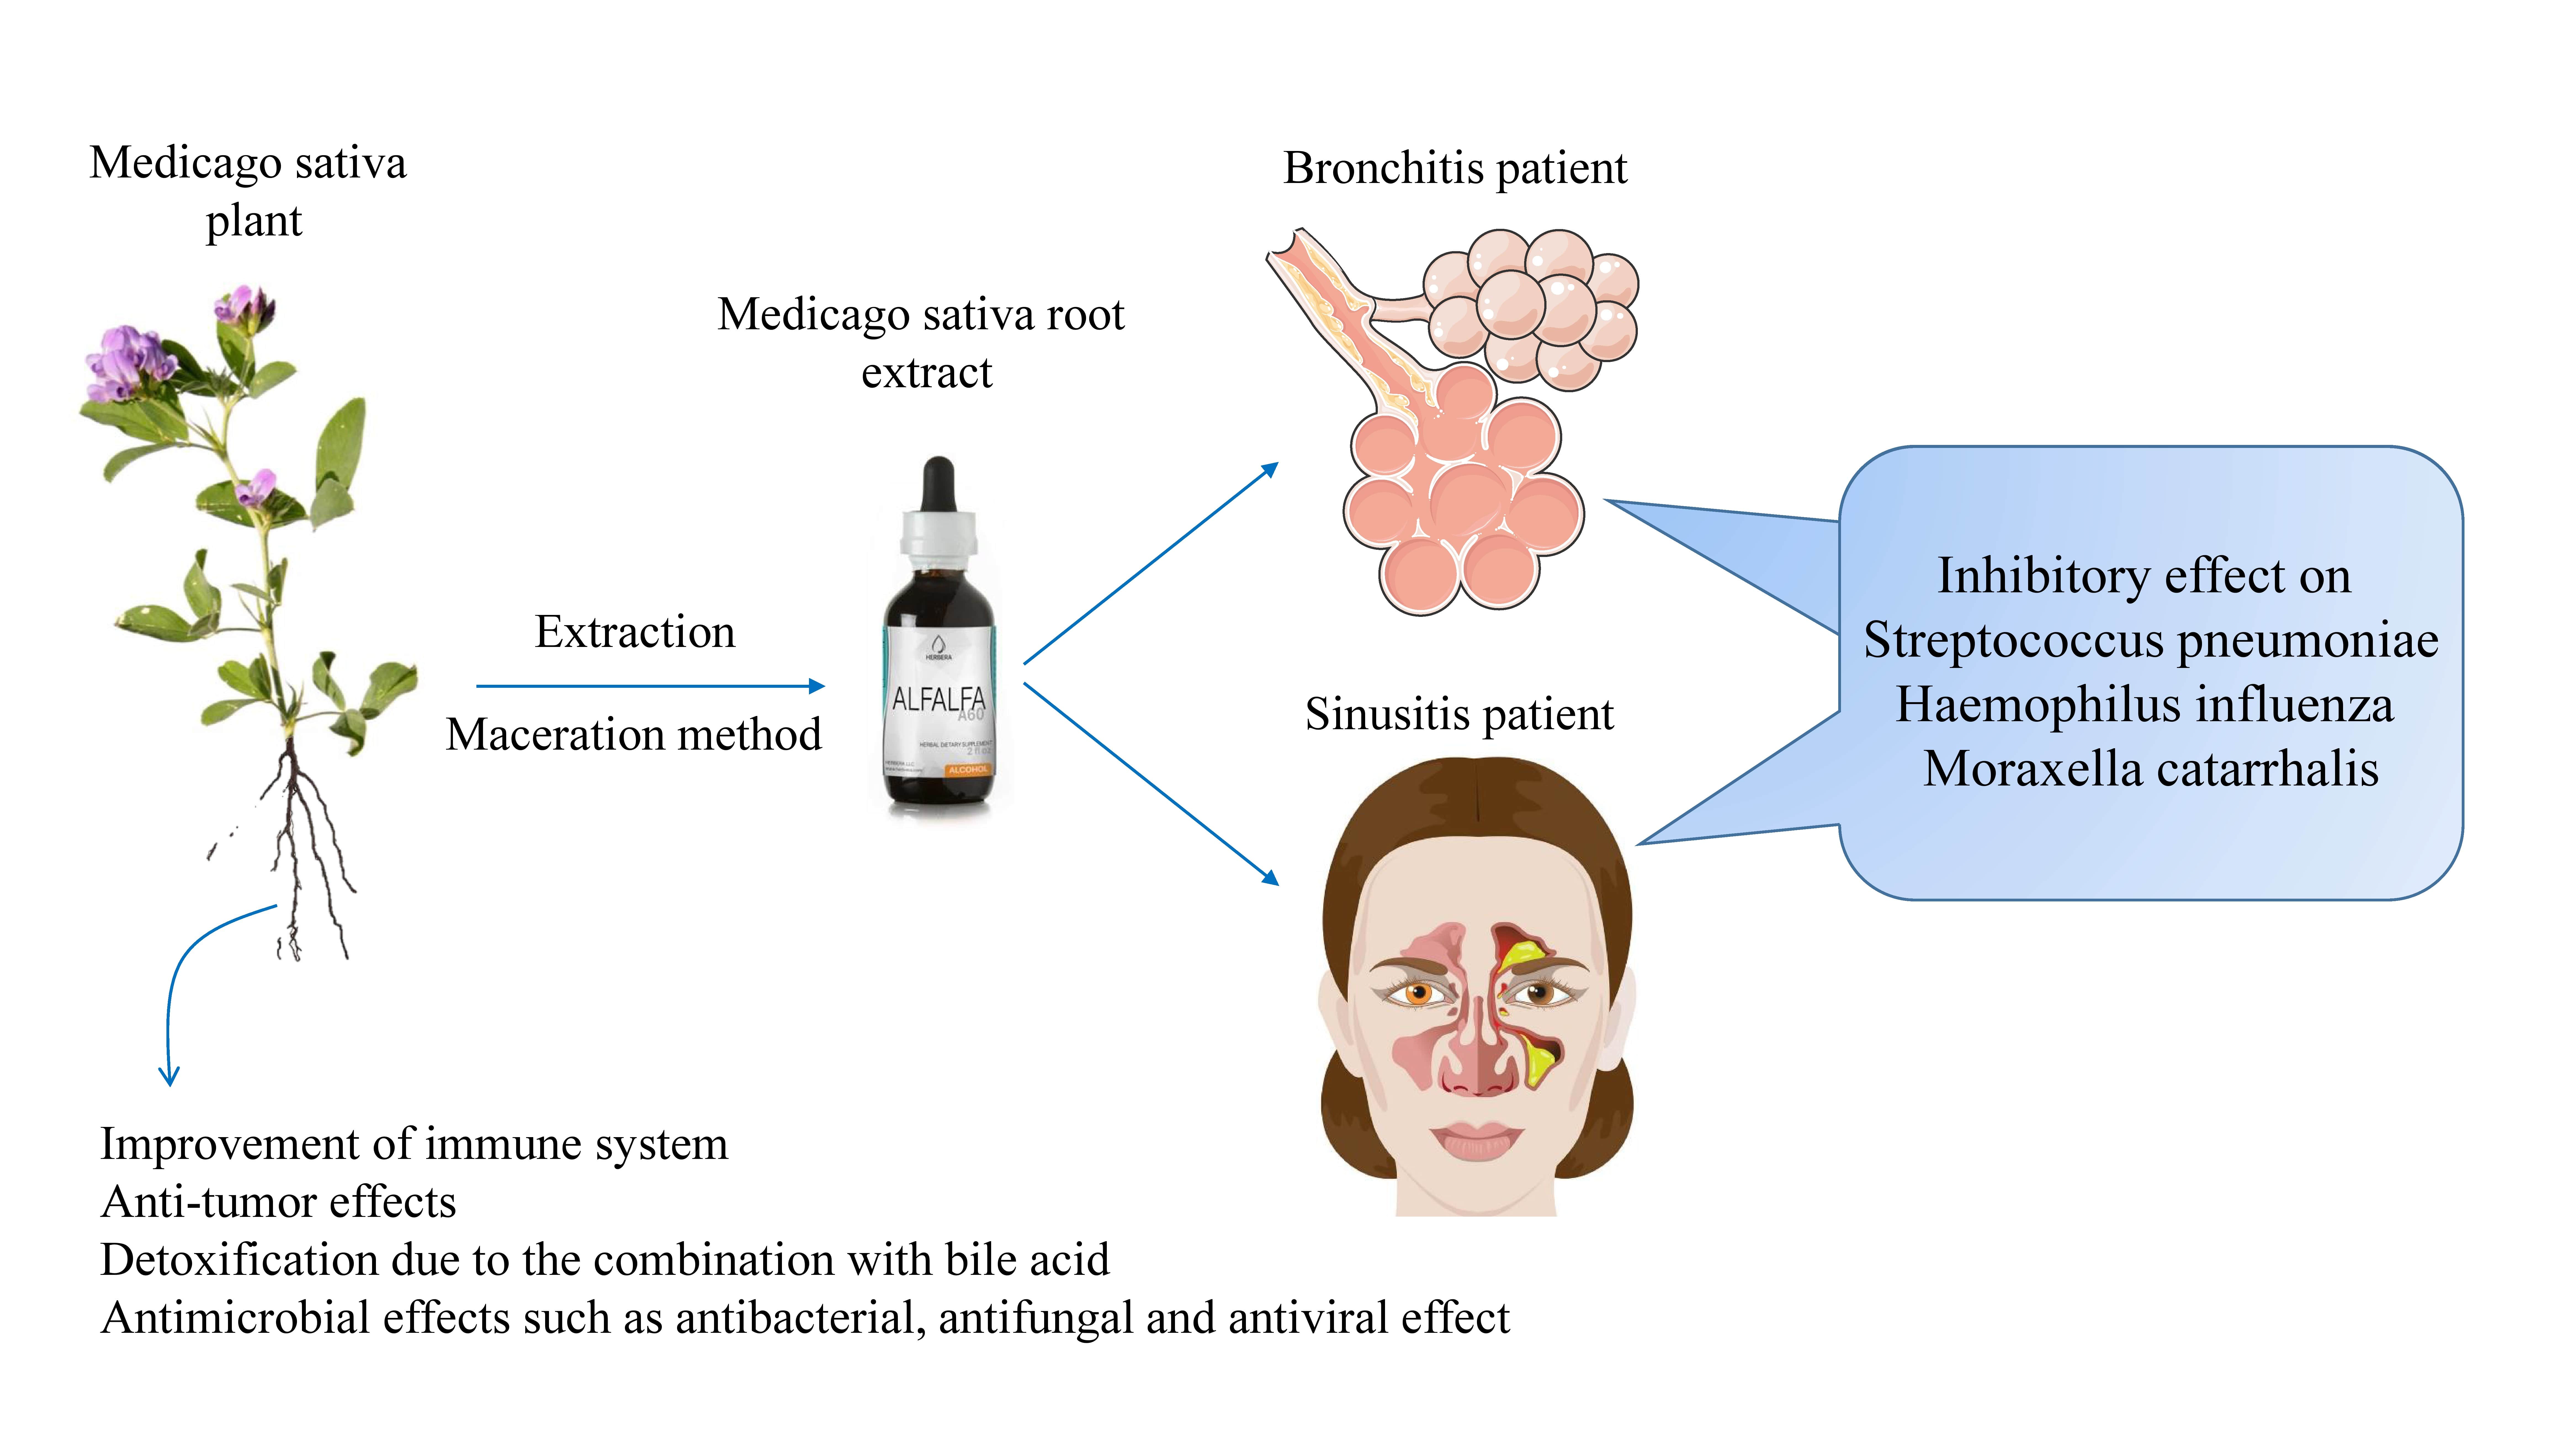 Antibacterial effect of Medicago sativa extract on the common bacterial in sinusitis infection 